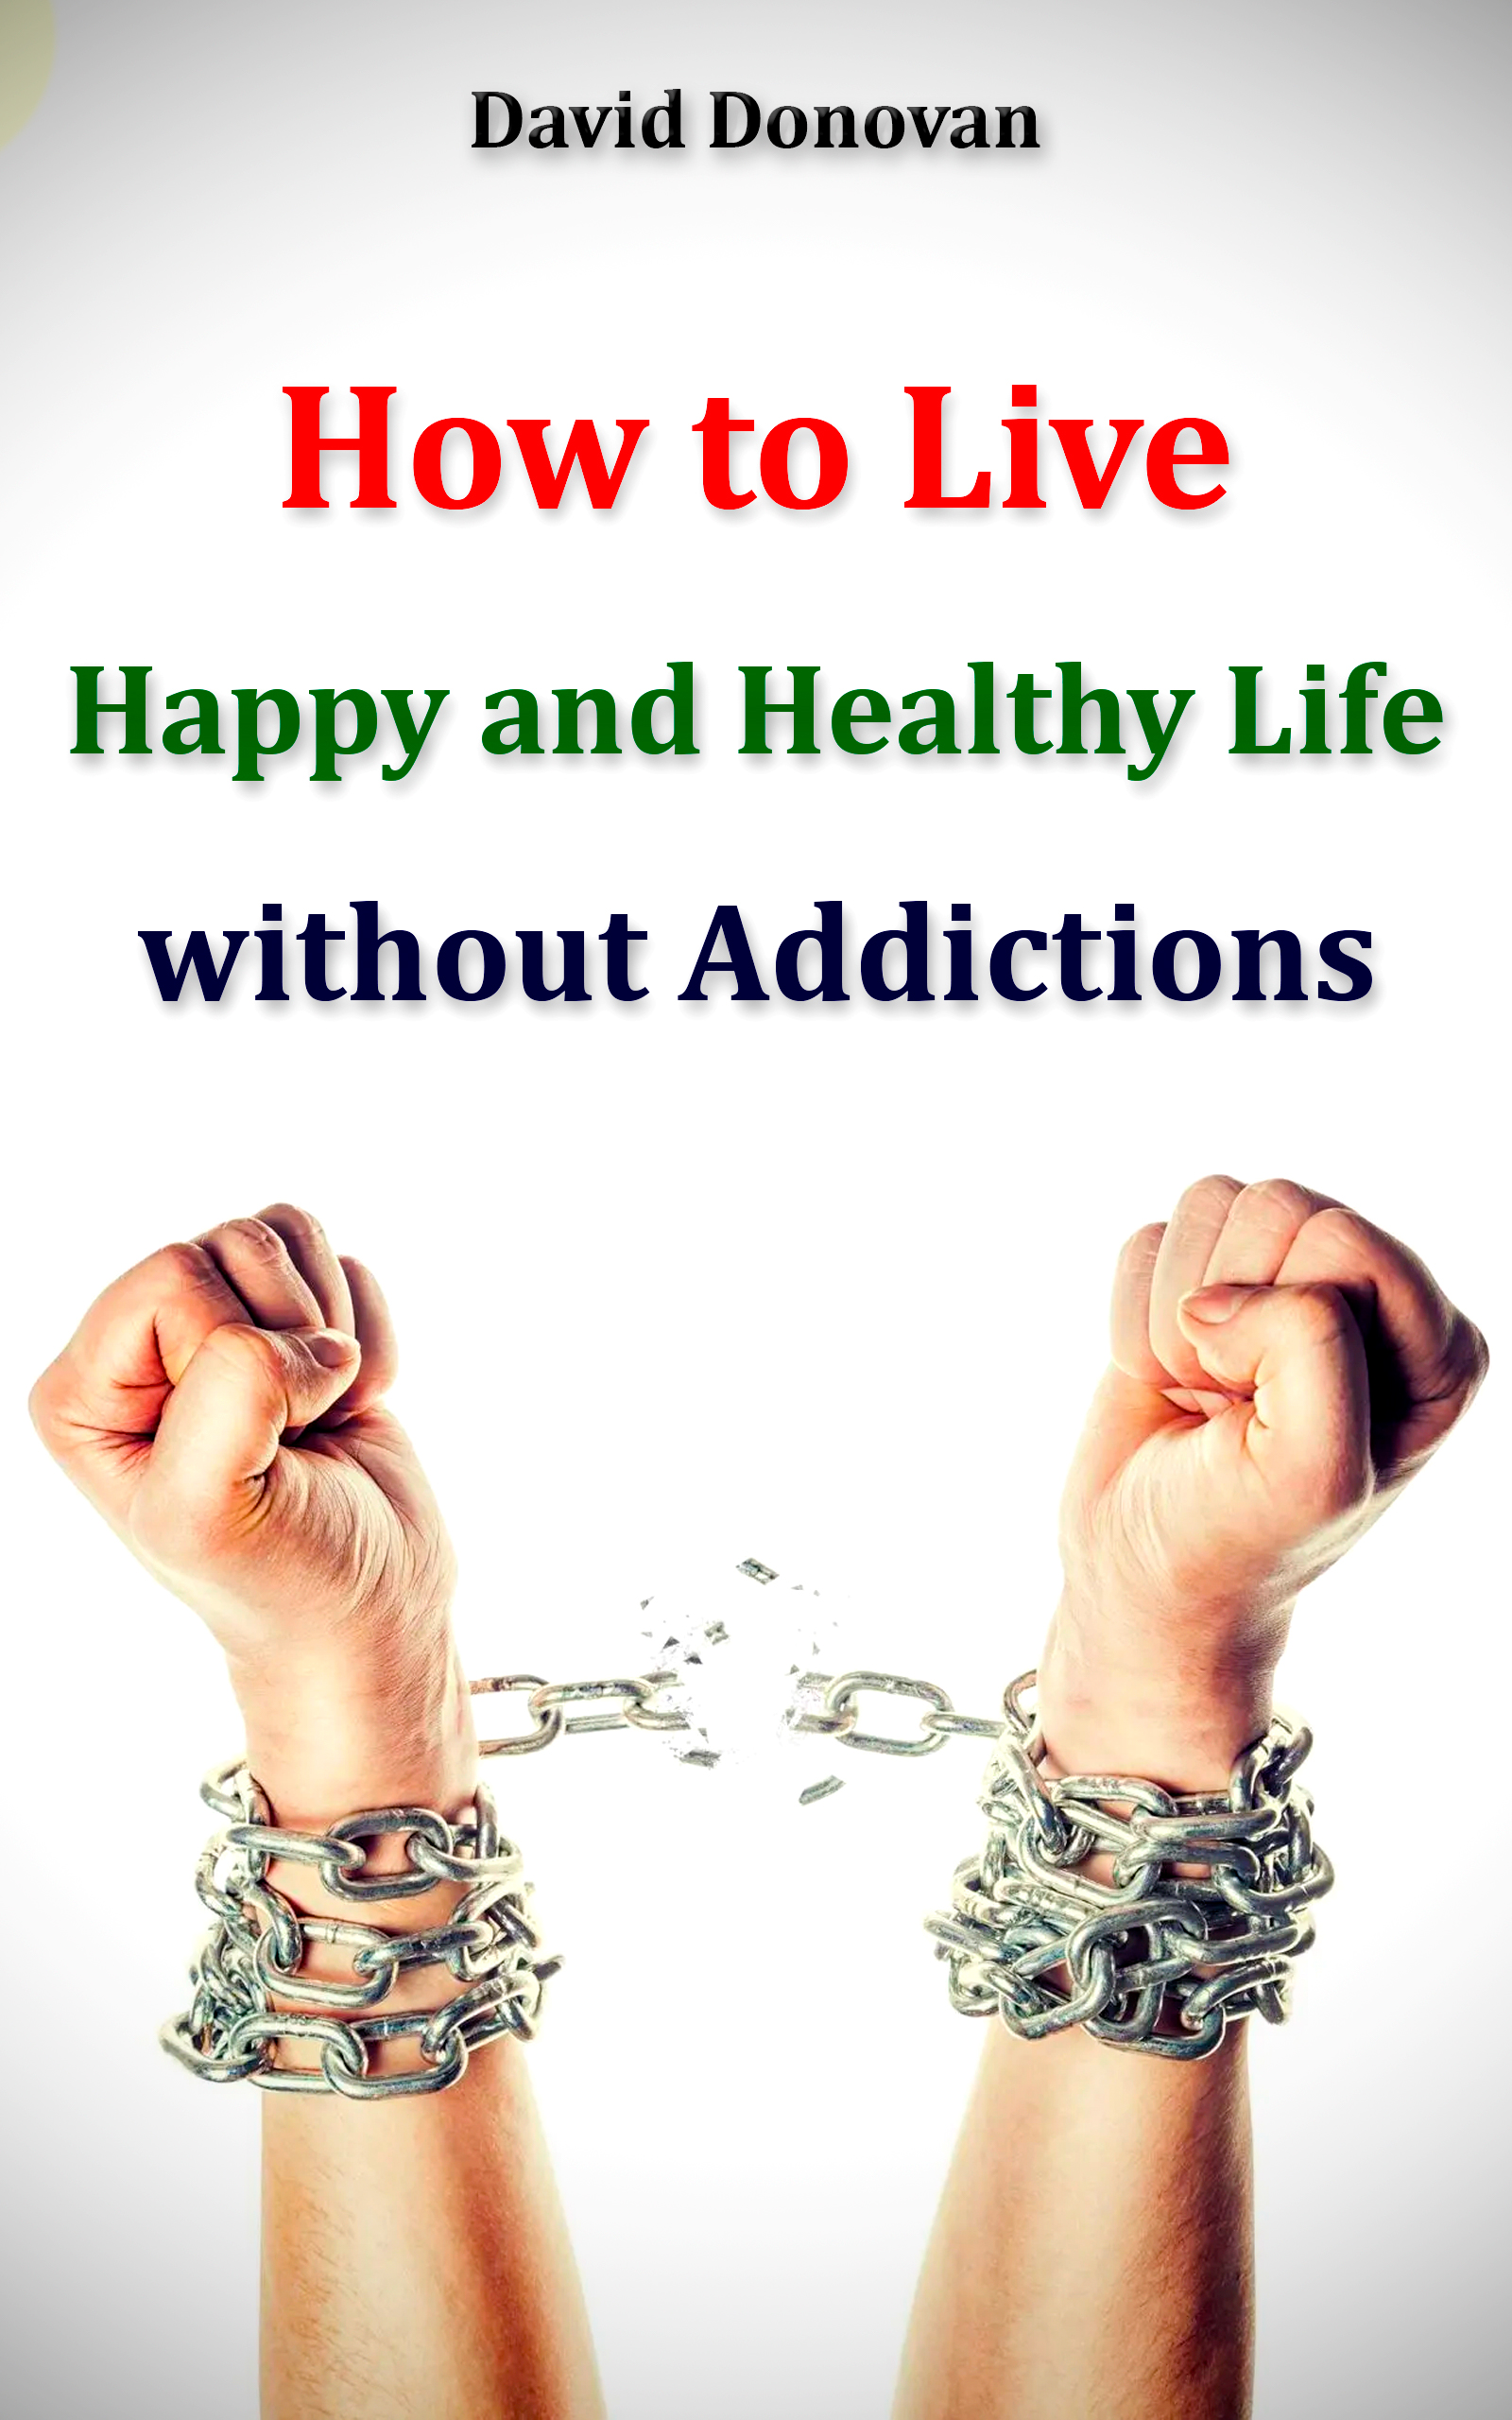 FREE: How to Live Happy and Healthy Life Without Addictions by David Donovan